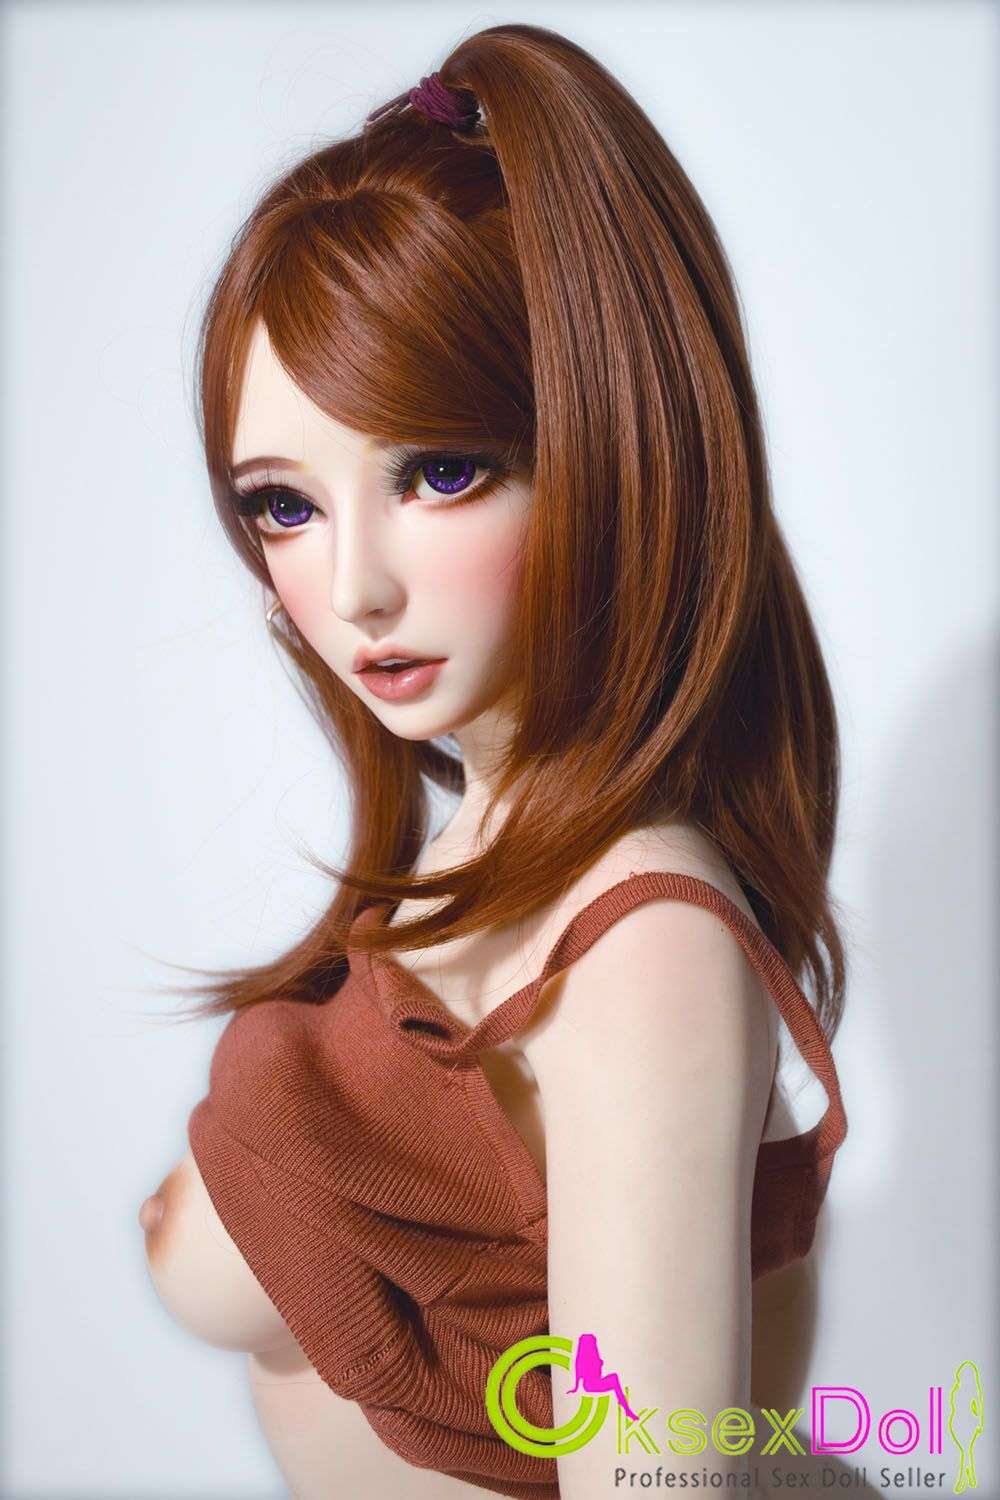 kg Real Doll pic